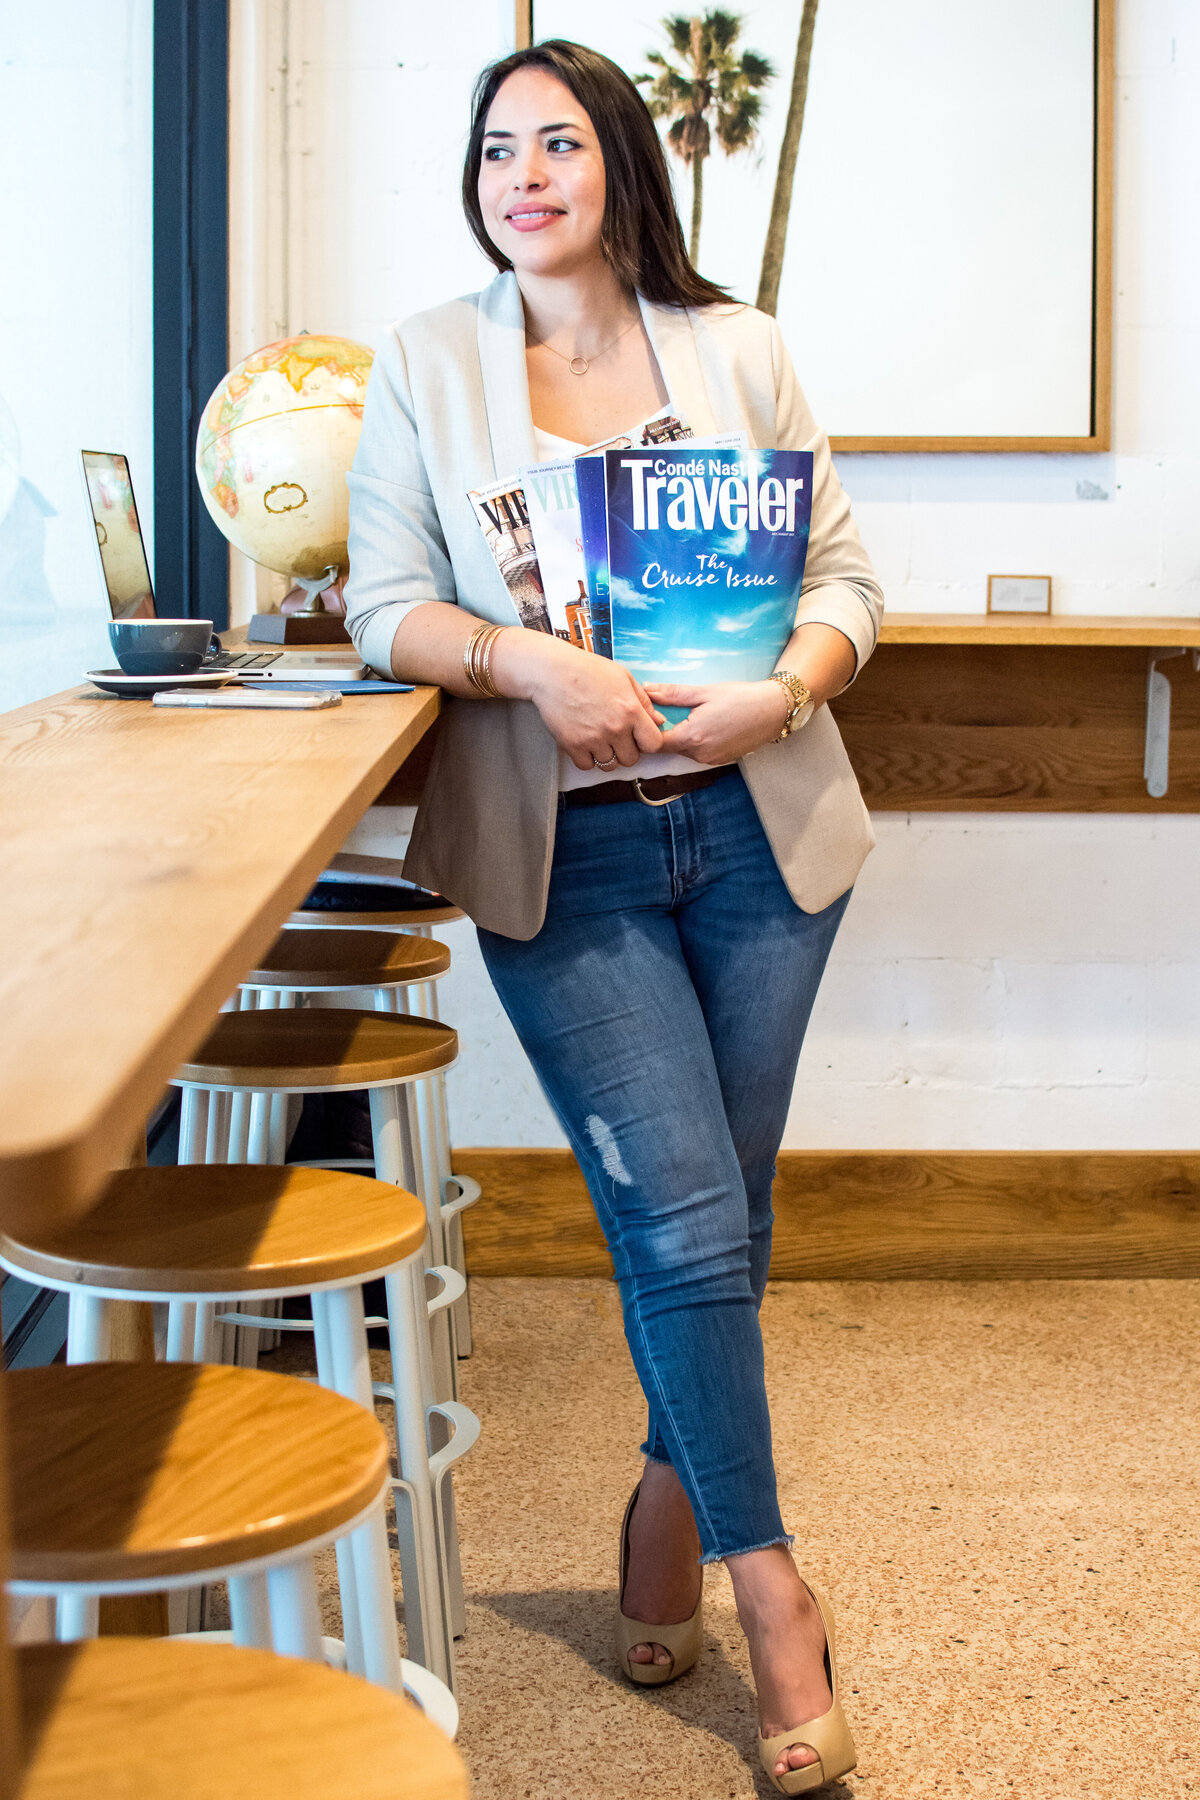 Hispanic woman wearing tan blazer and jeans leans agains a coffee shop bar holding travel magazines